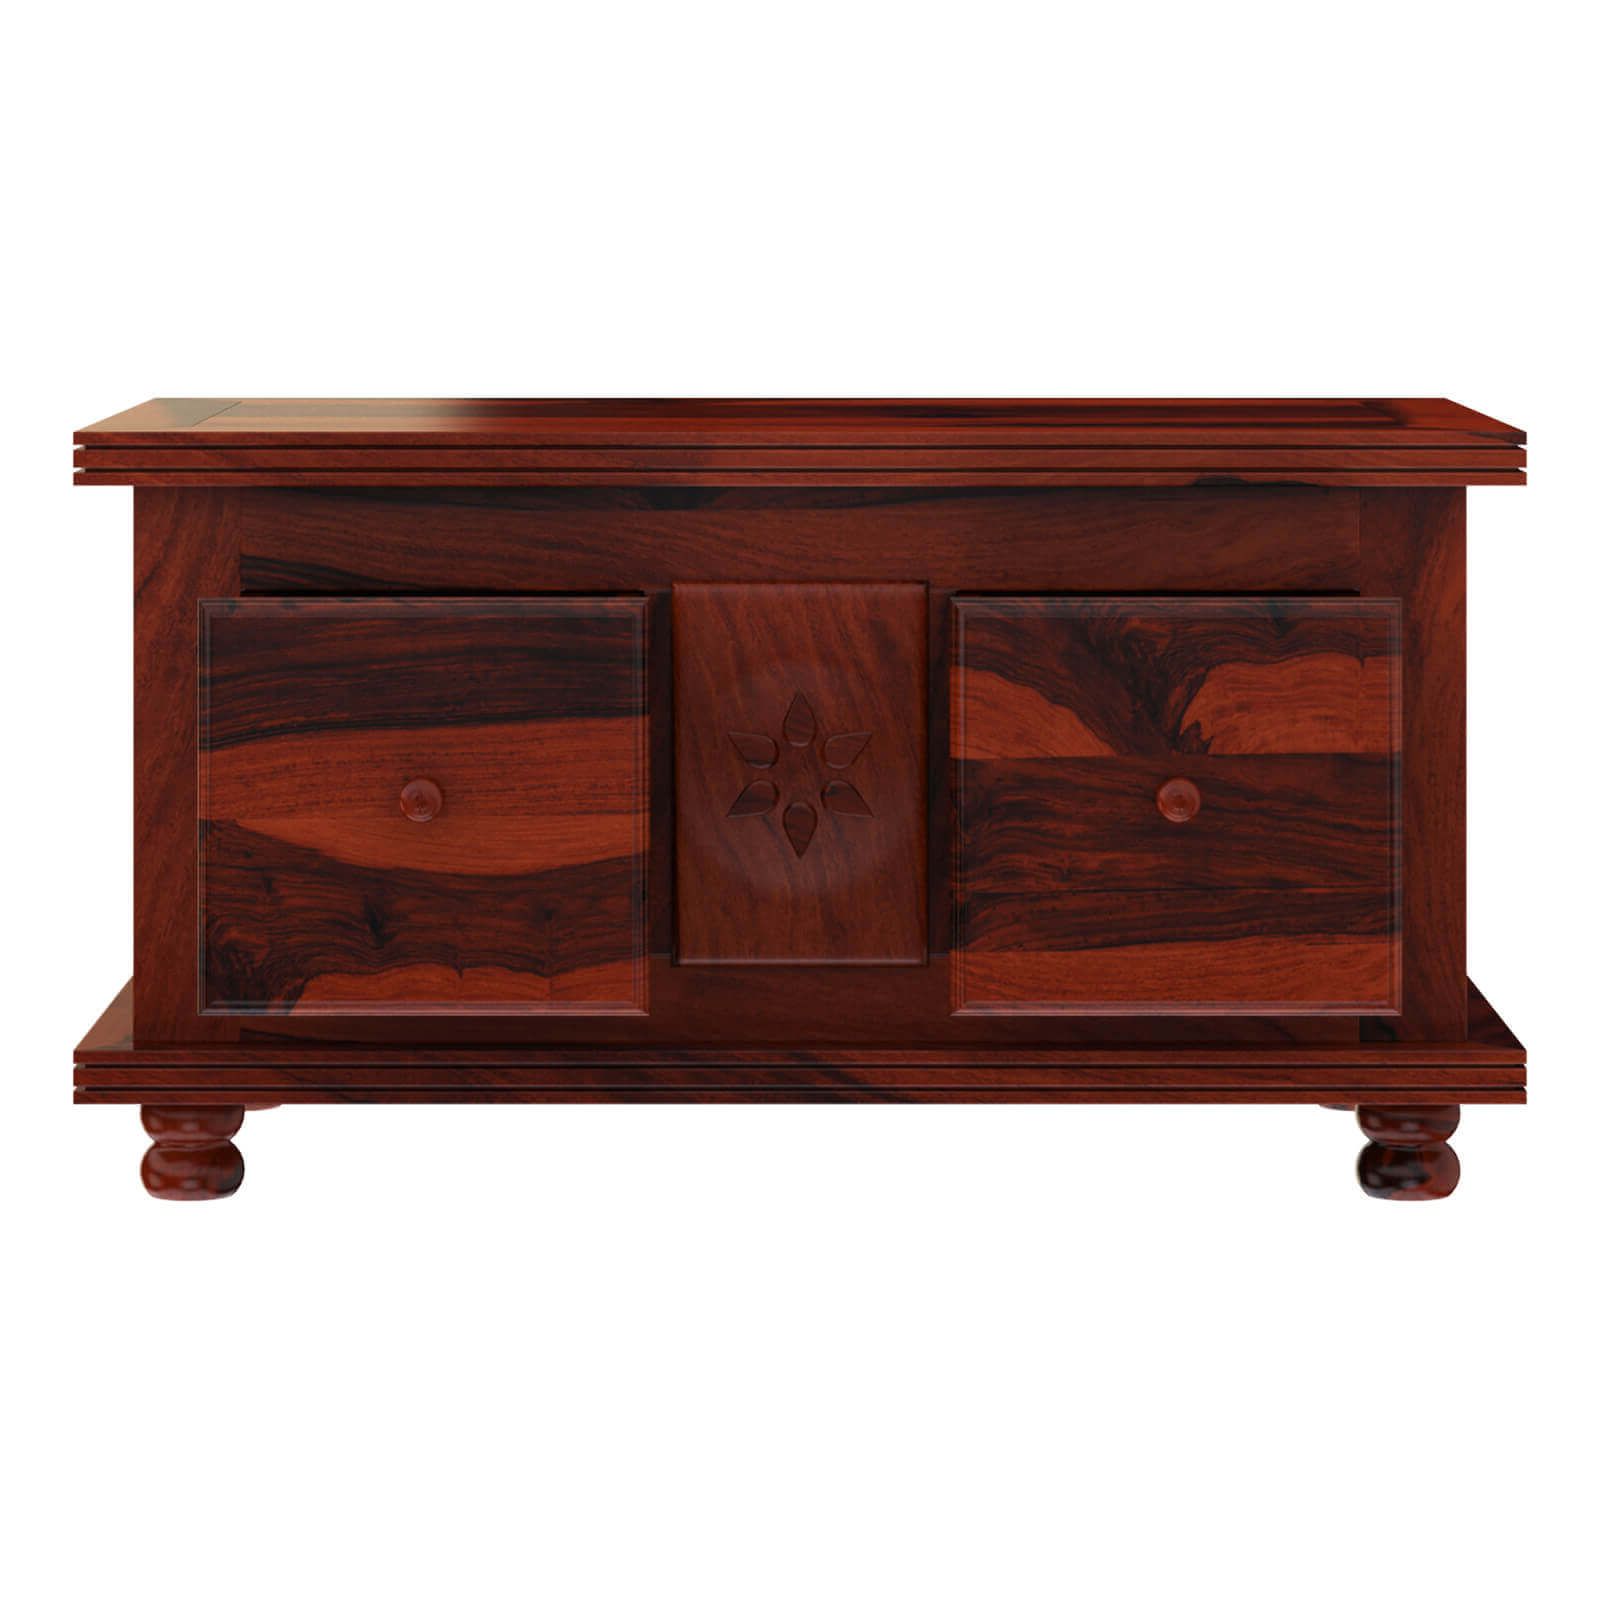 Widely Used 2 Drawer Cocktail Tables For Arca Rustic Solid Wood 2 Drawer Storage Cocktail Coffee Table (View 4 of 20)